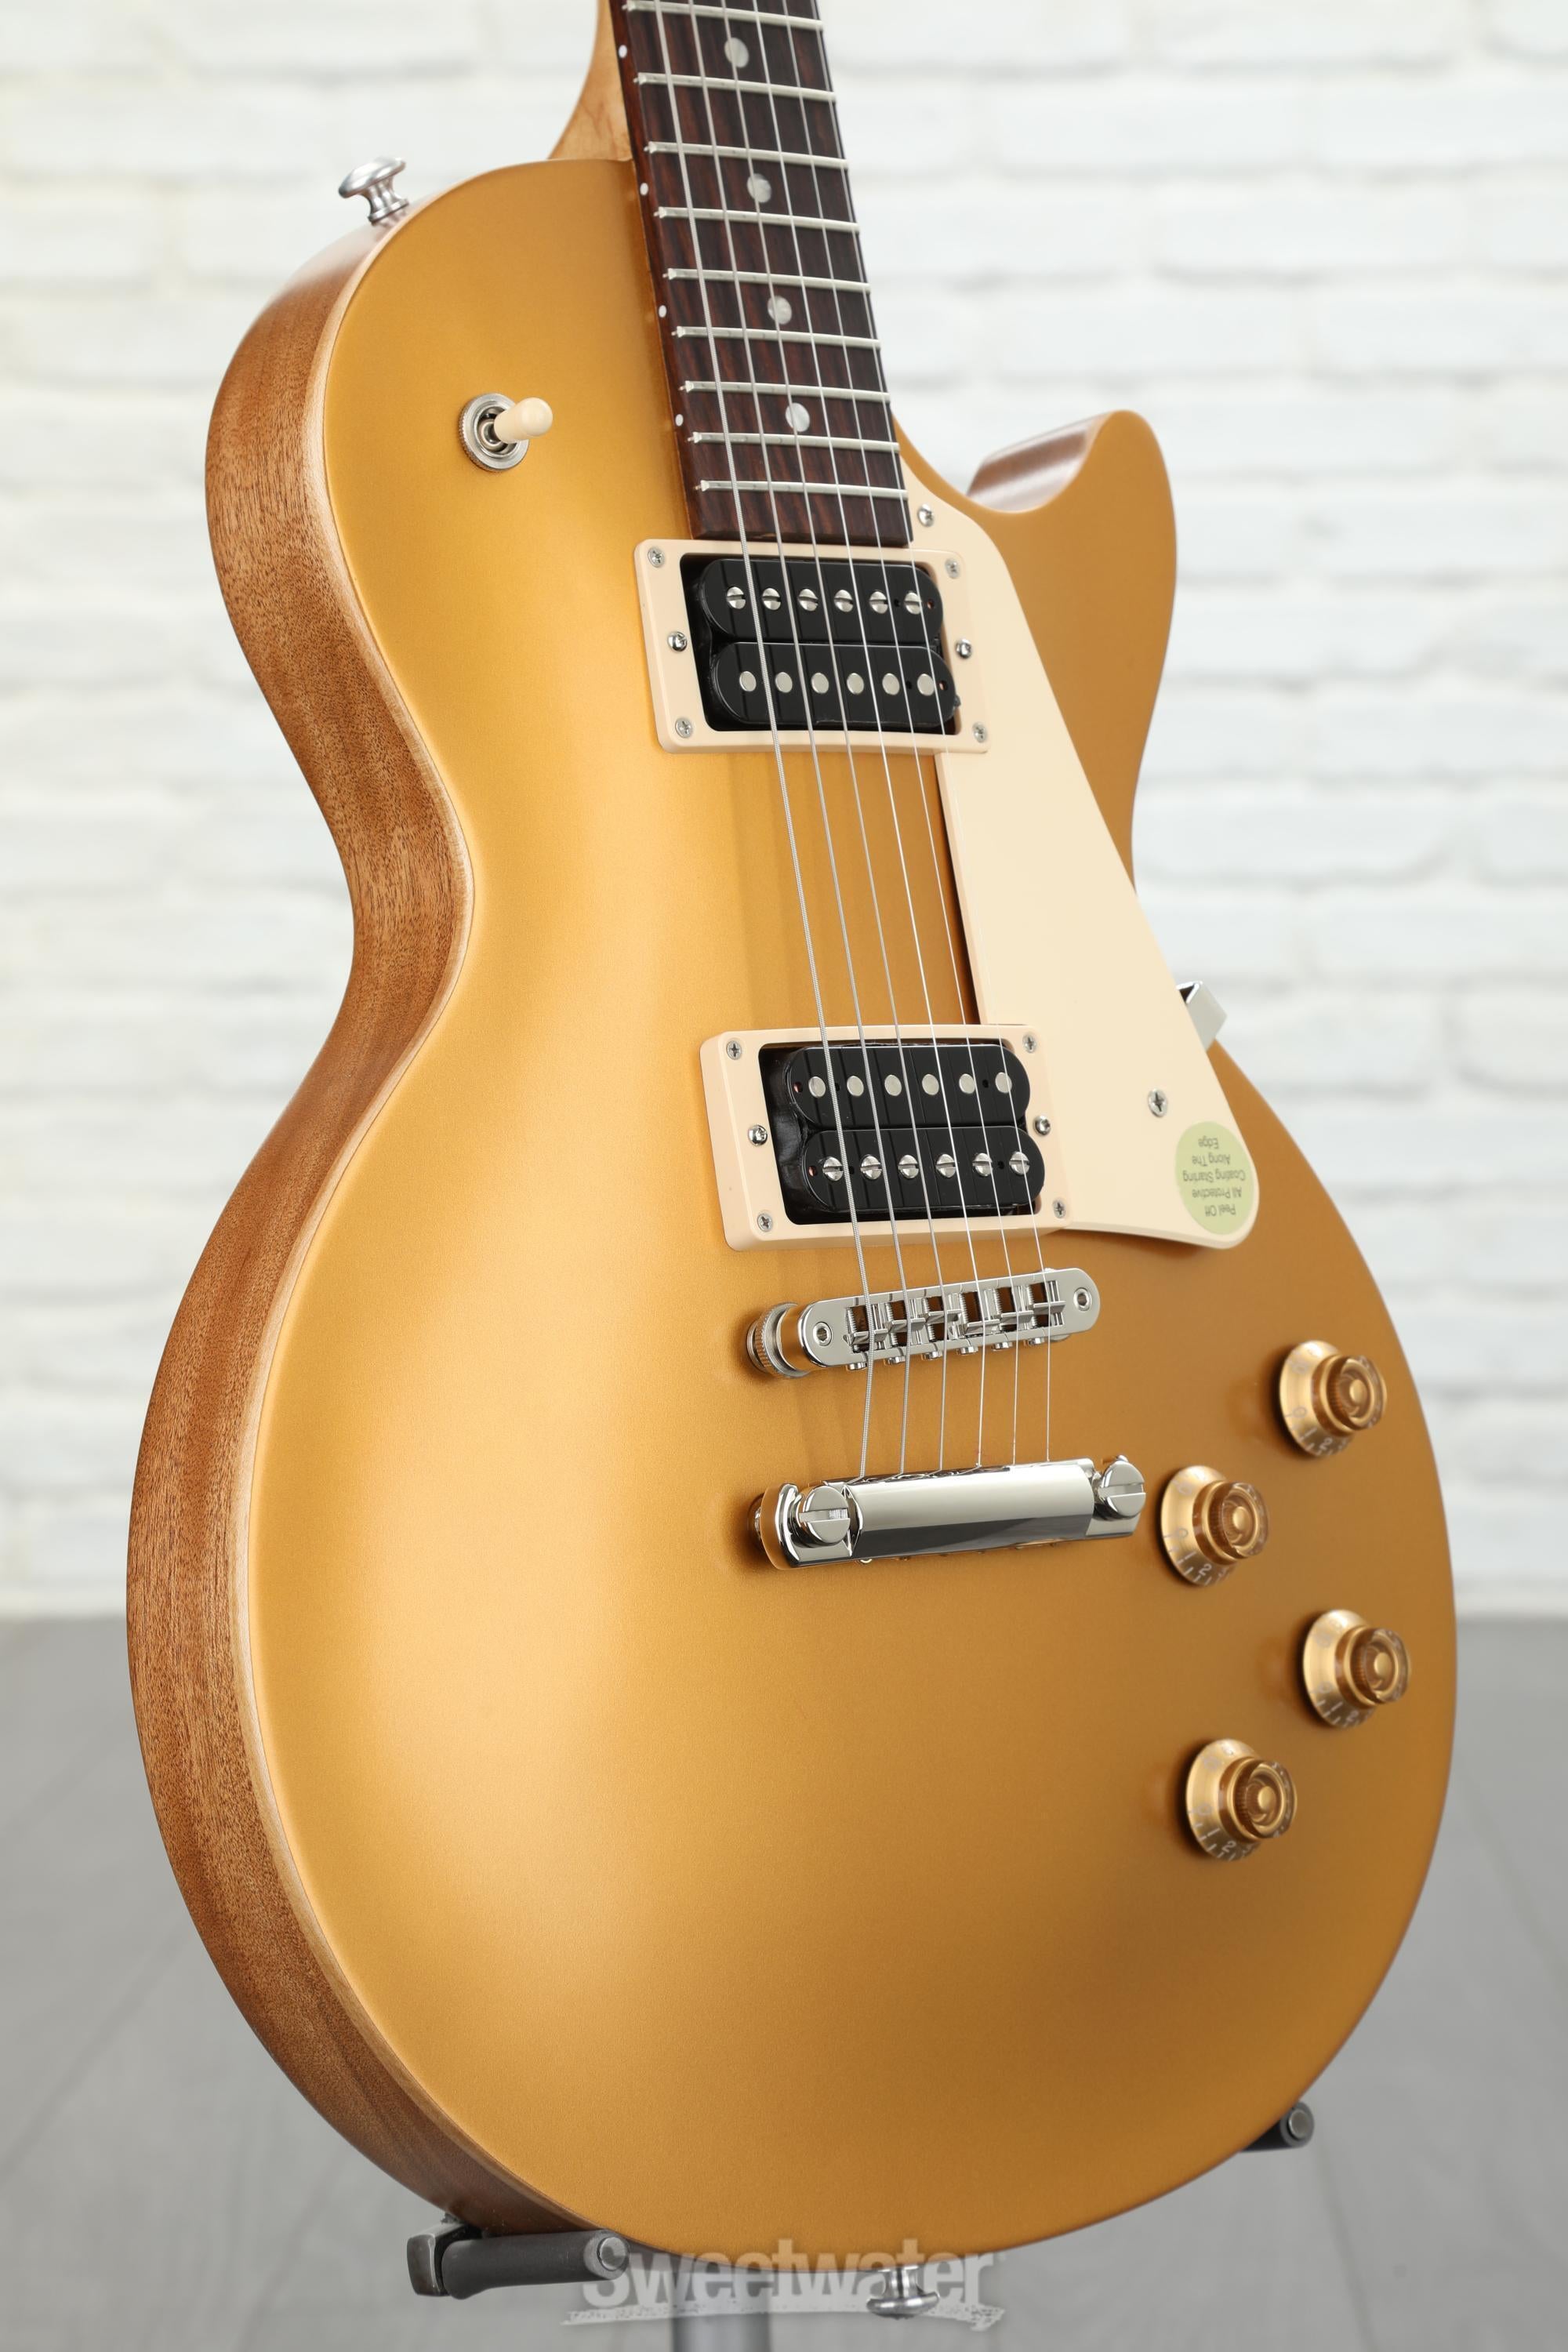 Gibson Les Paul Studio Tribute 2019 Sweetwater Exclusive - Satin Gold